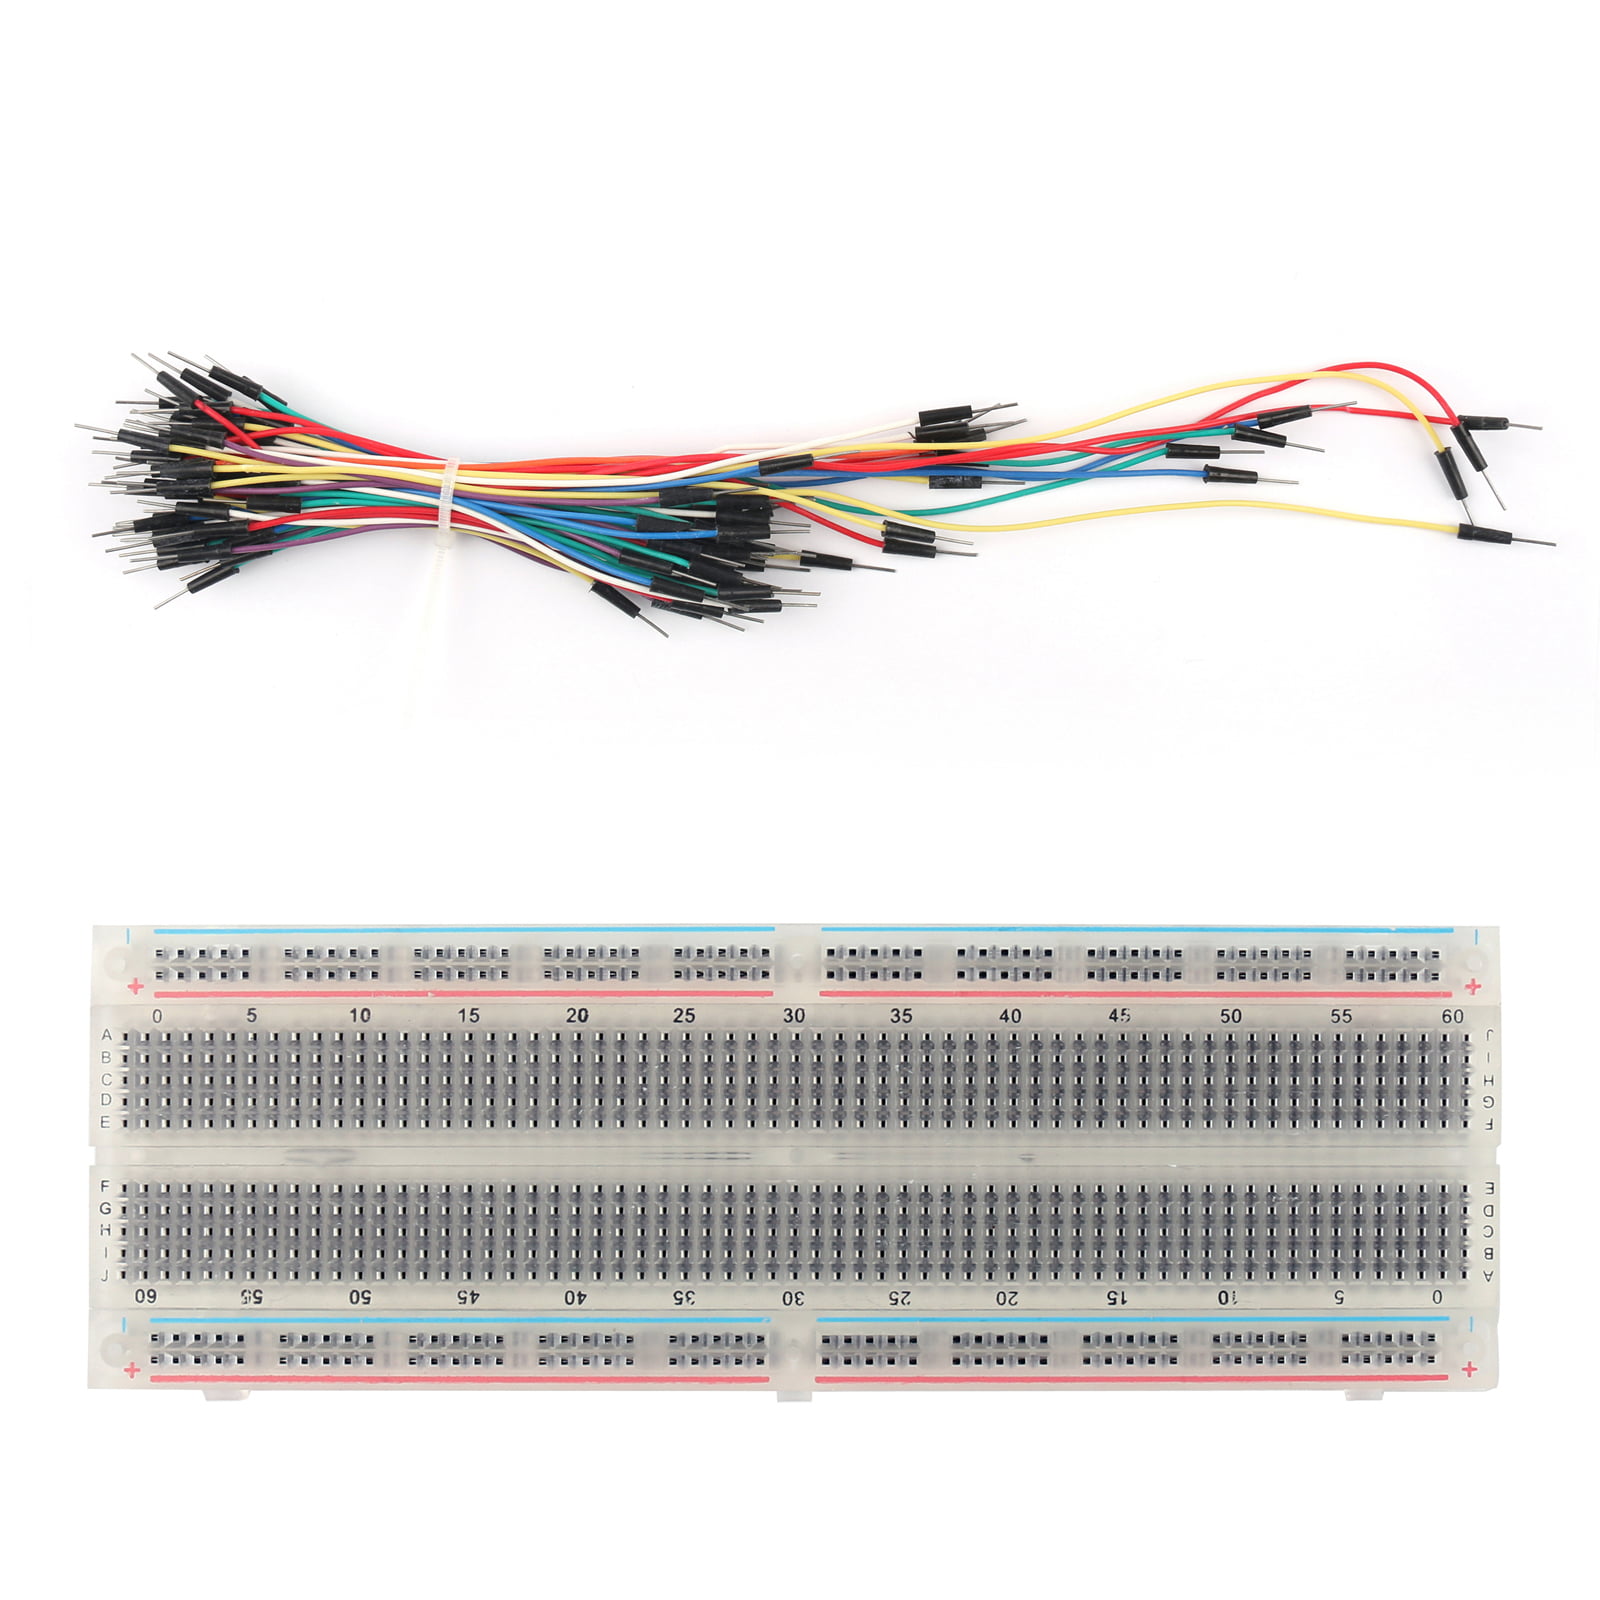 830 Tie Points Solderless PCB Breadboard MB102+65Pcs Jumper cable wires Arduino 